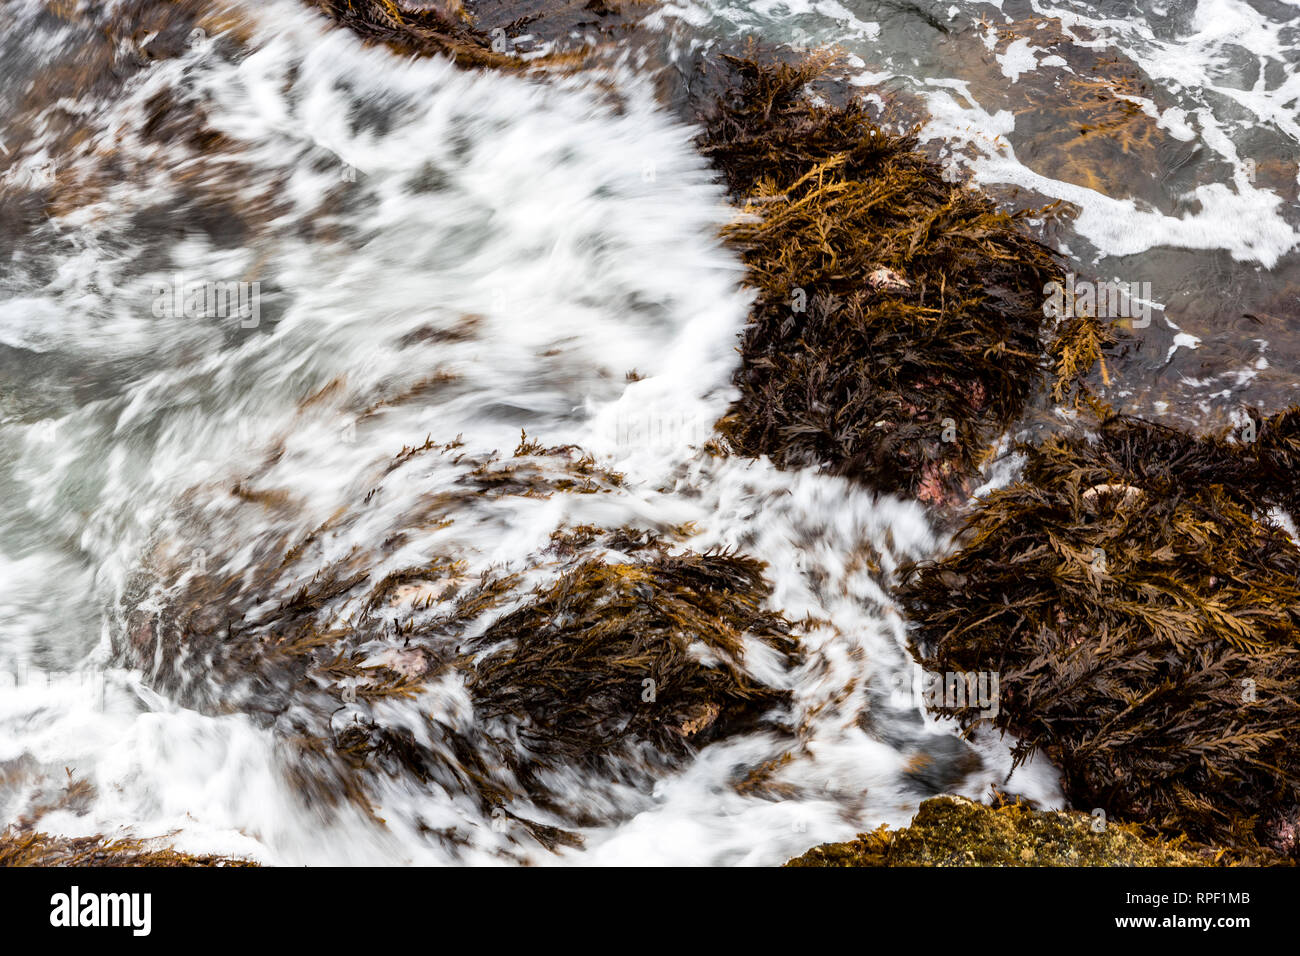 Detail of frond of brown stalked kelp Ecklonia radiata of southern temperate Pacific ocean. Stock Photo